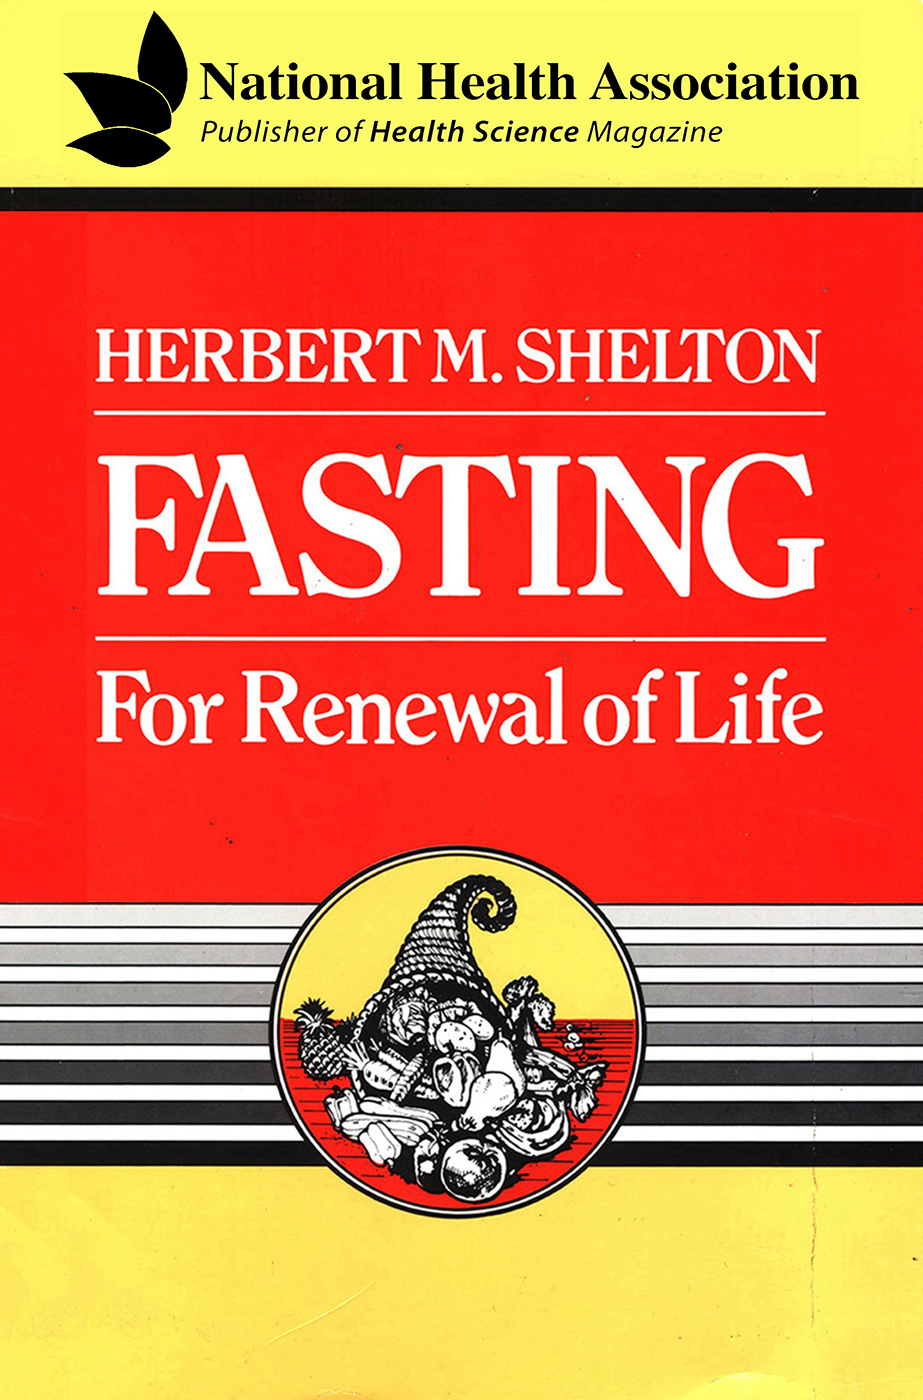 Fasting for Renewal of Life